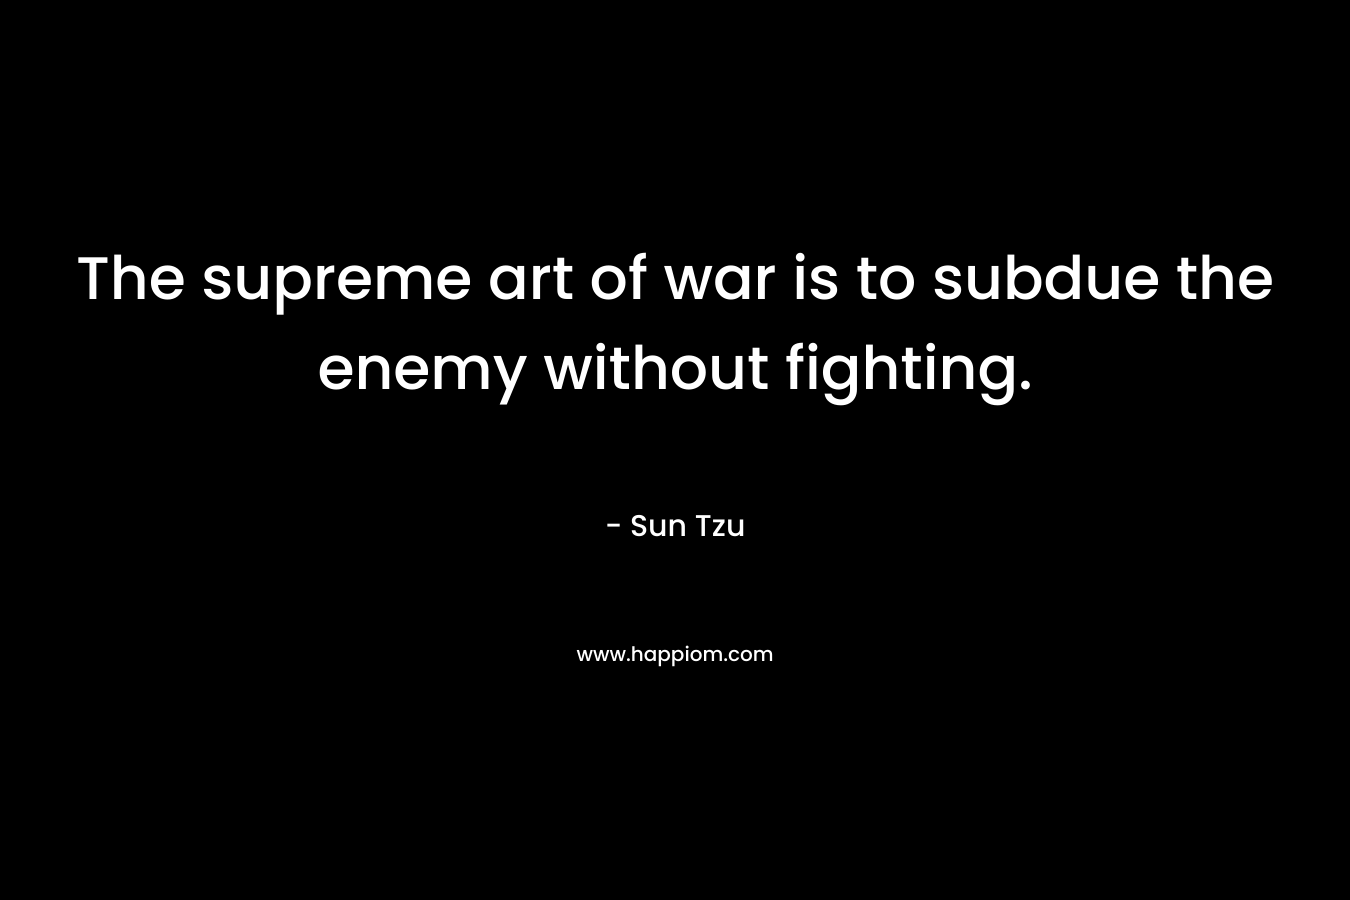 The supreme art of war is to subdue the enemy without fighting. – Sun Tzu